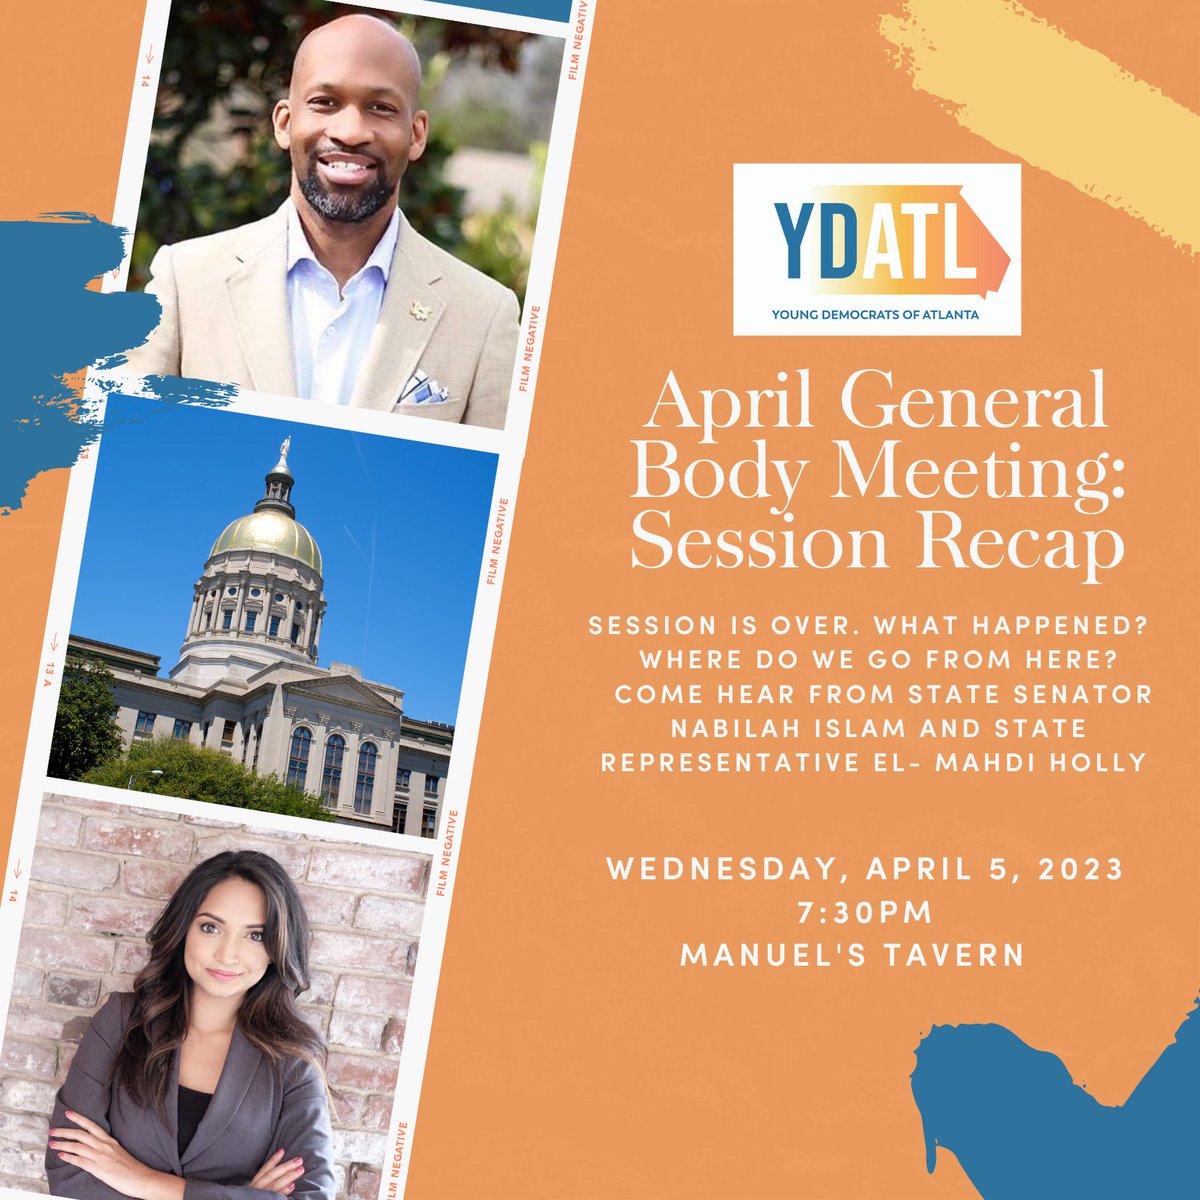 Legislative Session is now over. What happened? Come hear from @NabilahIslam and Rep. El-Mahdi Holly at Manuel’s Tavern this Wednesday.